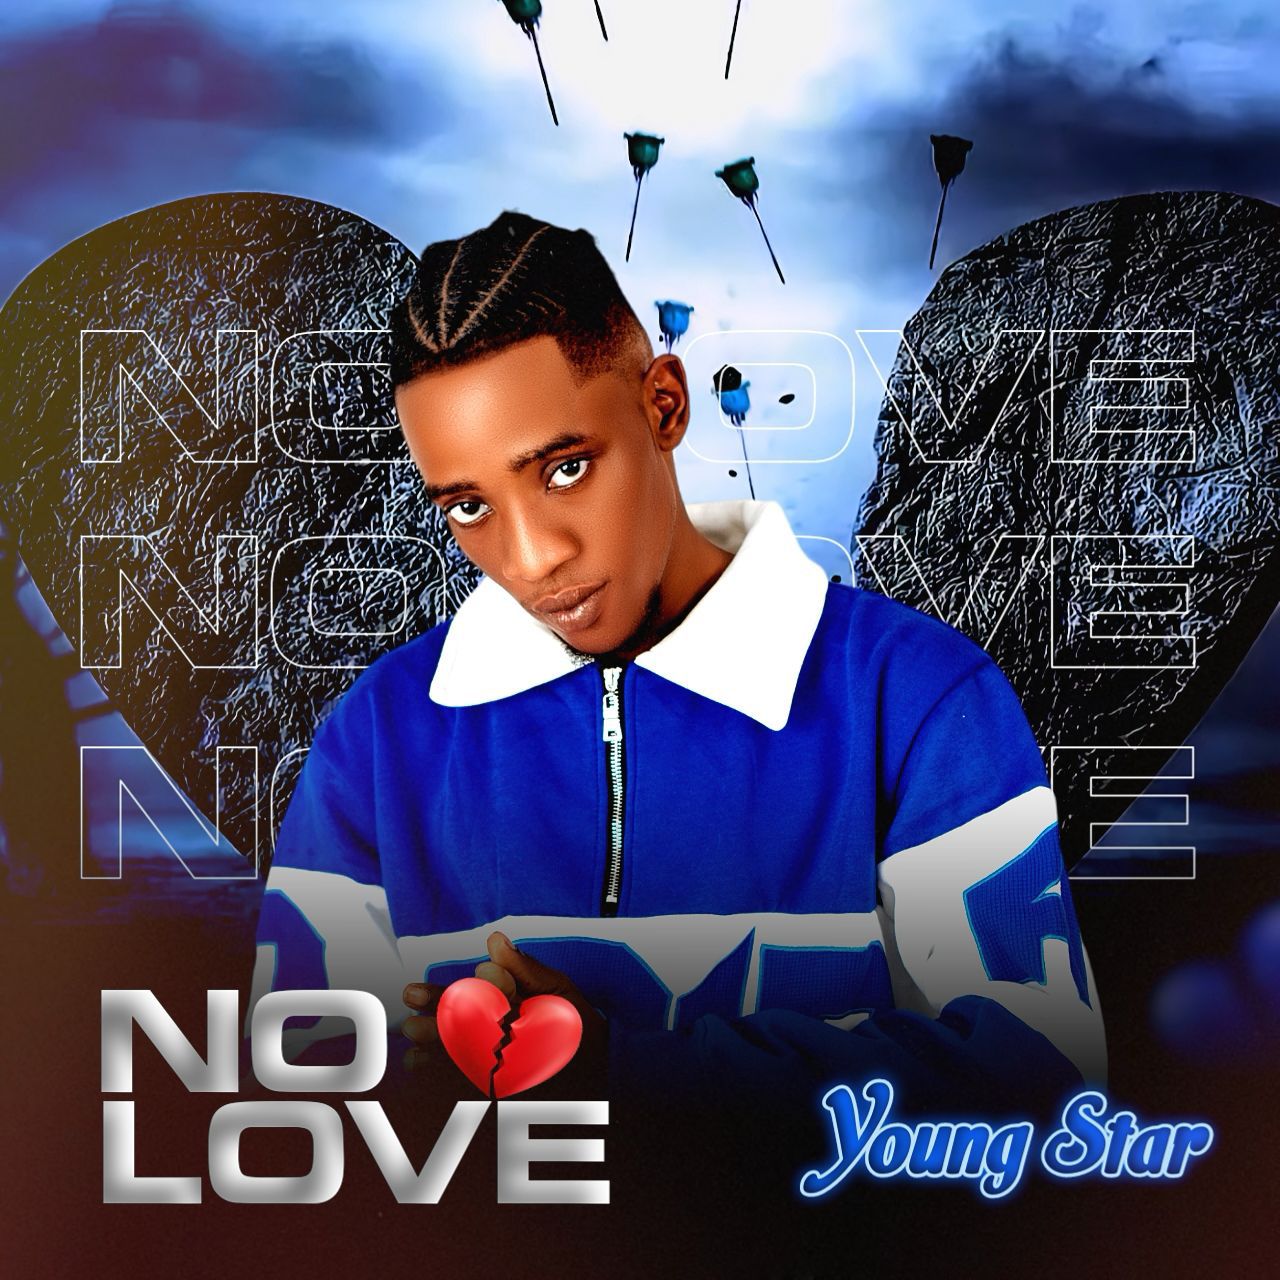 Young star – No Love